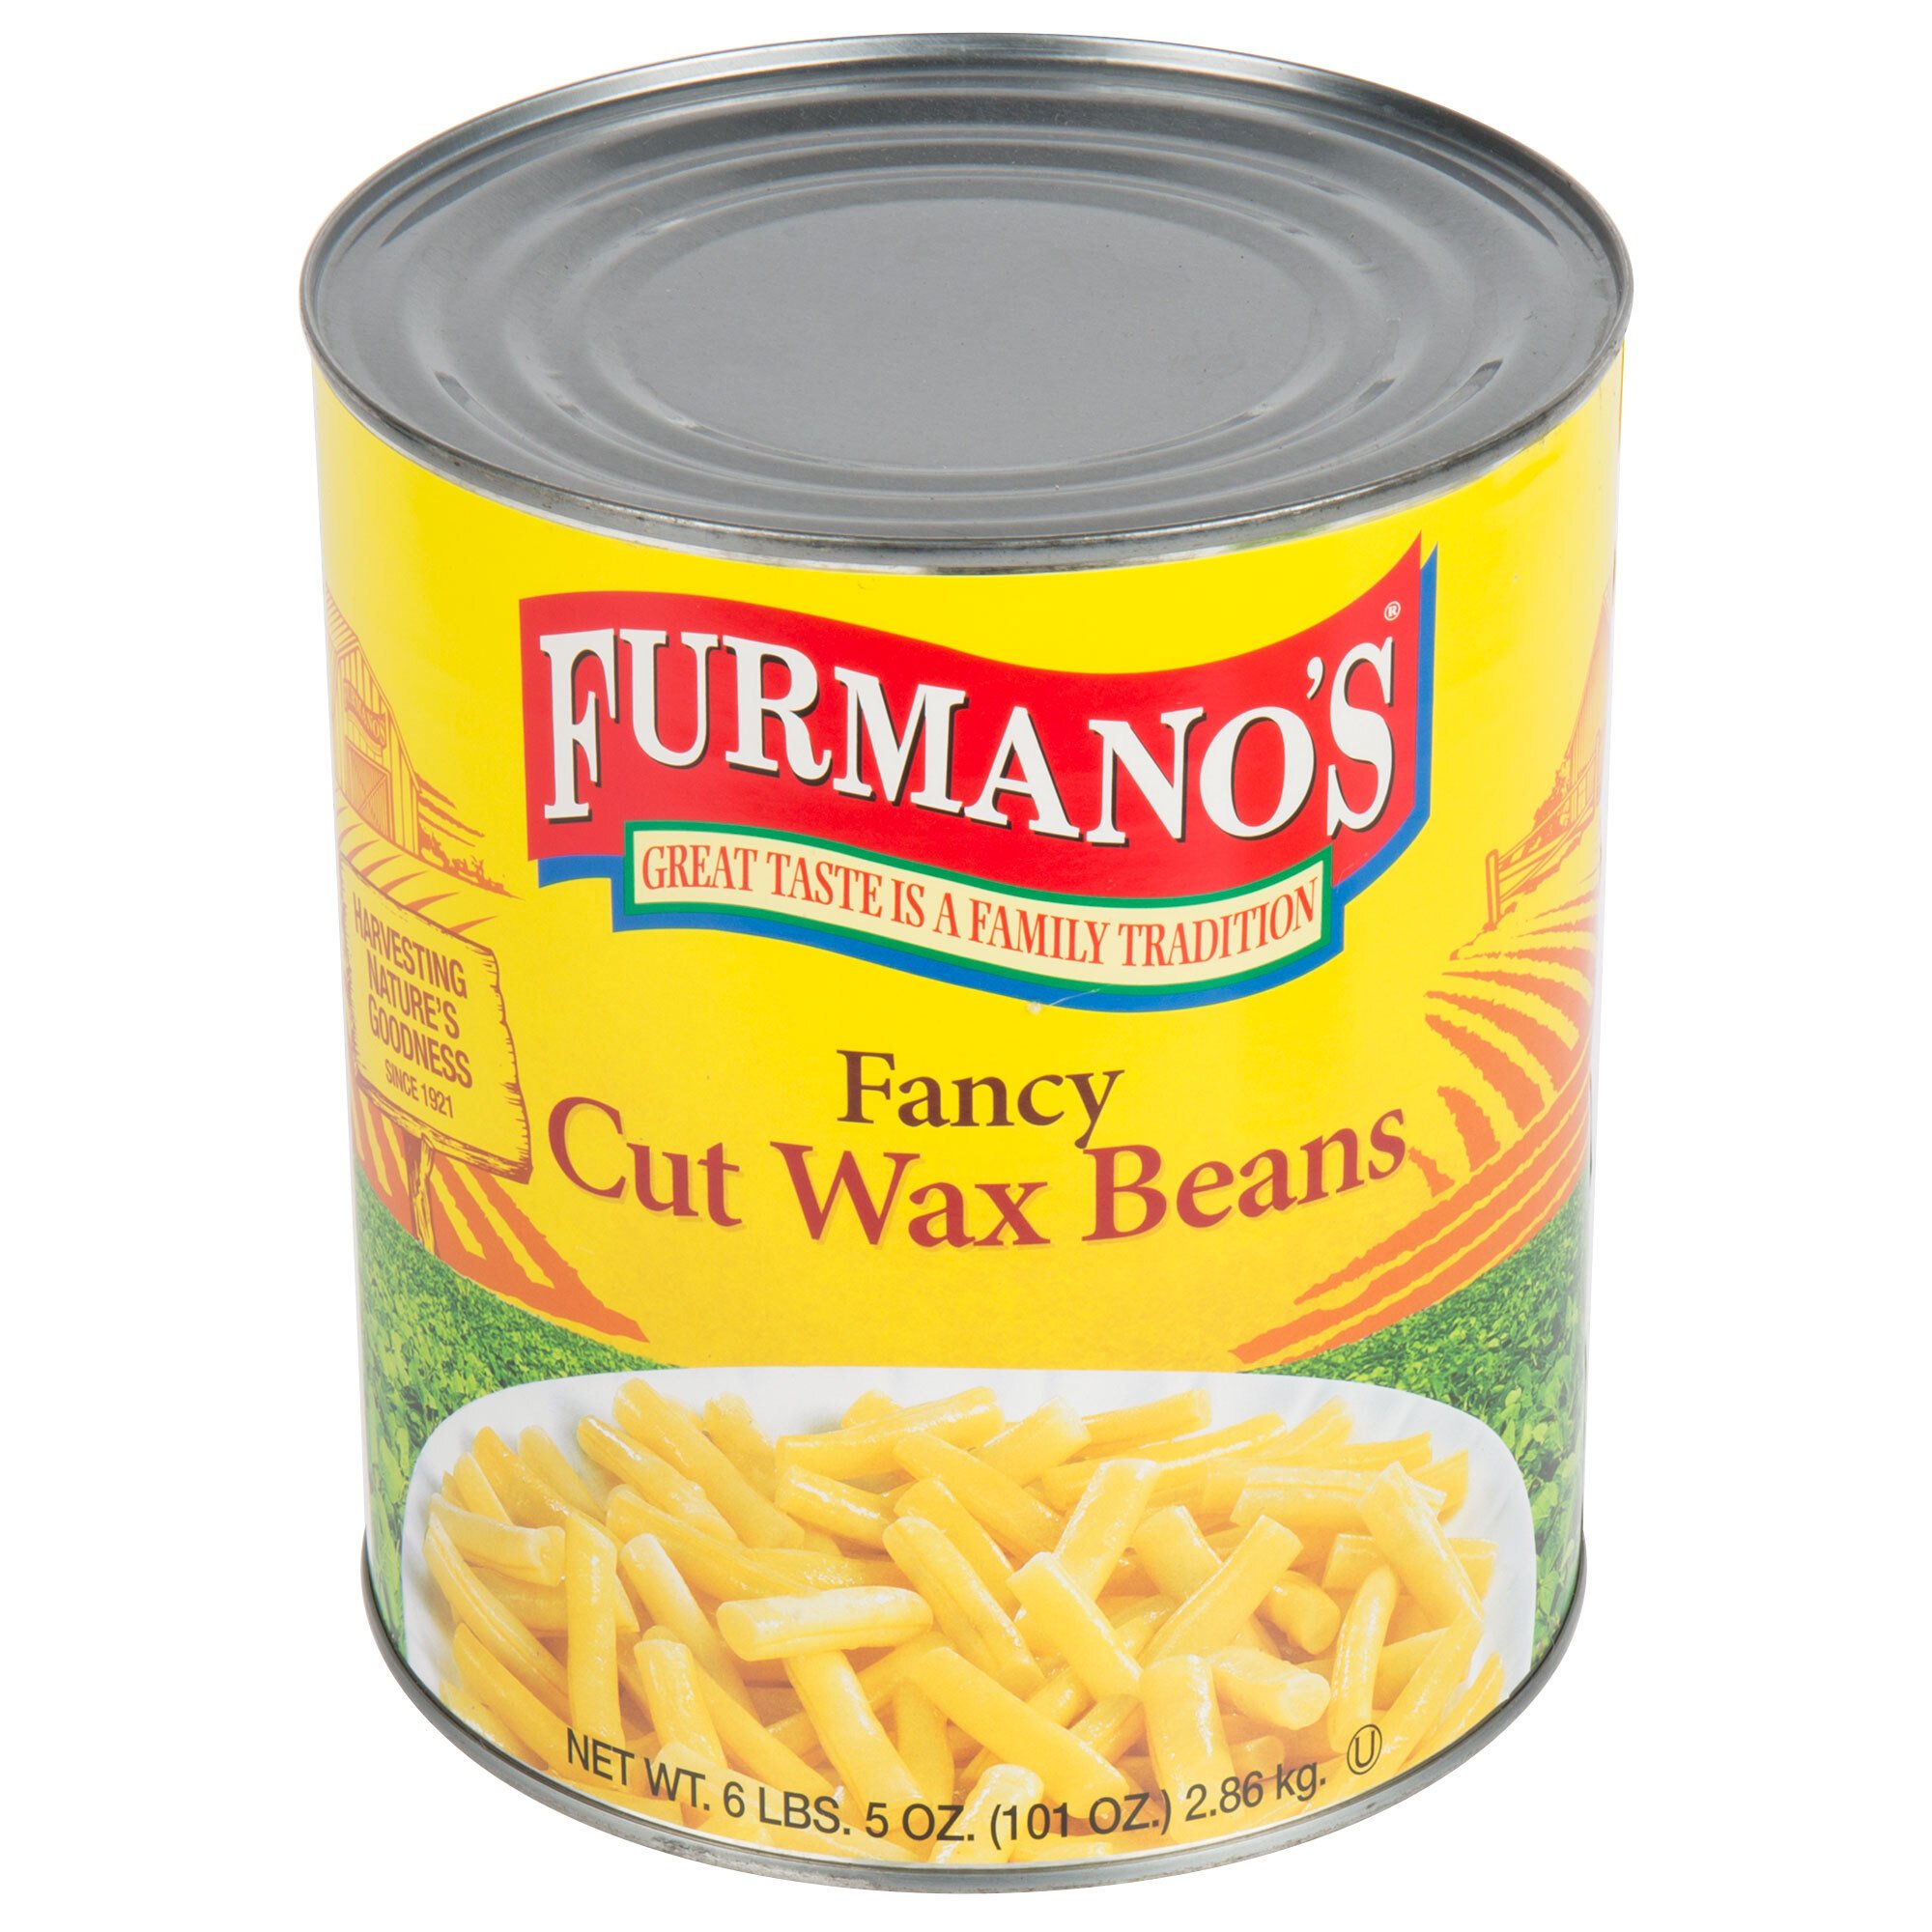 canned wax beans recipes